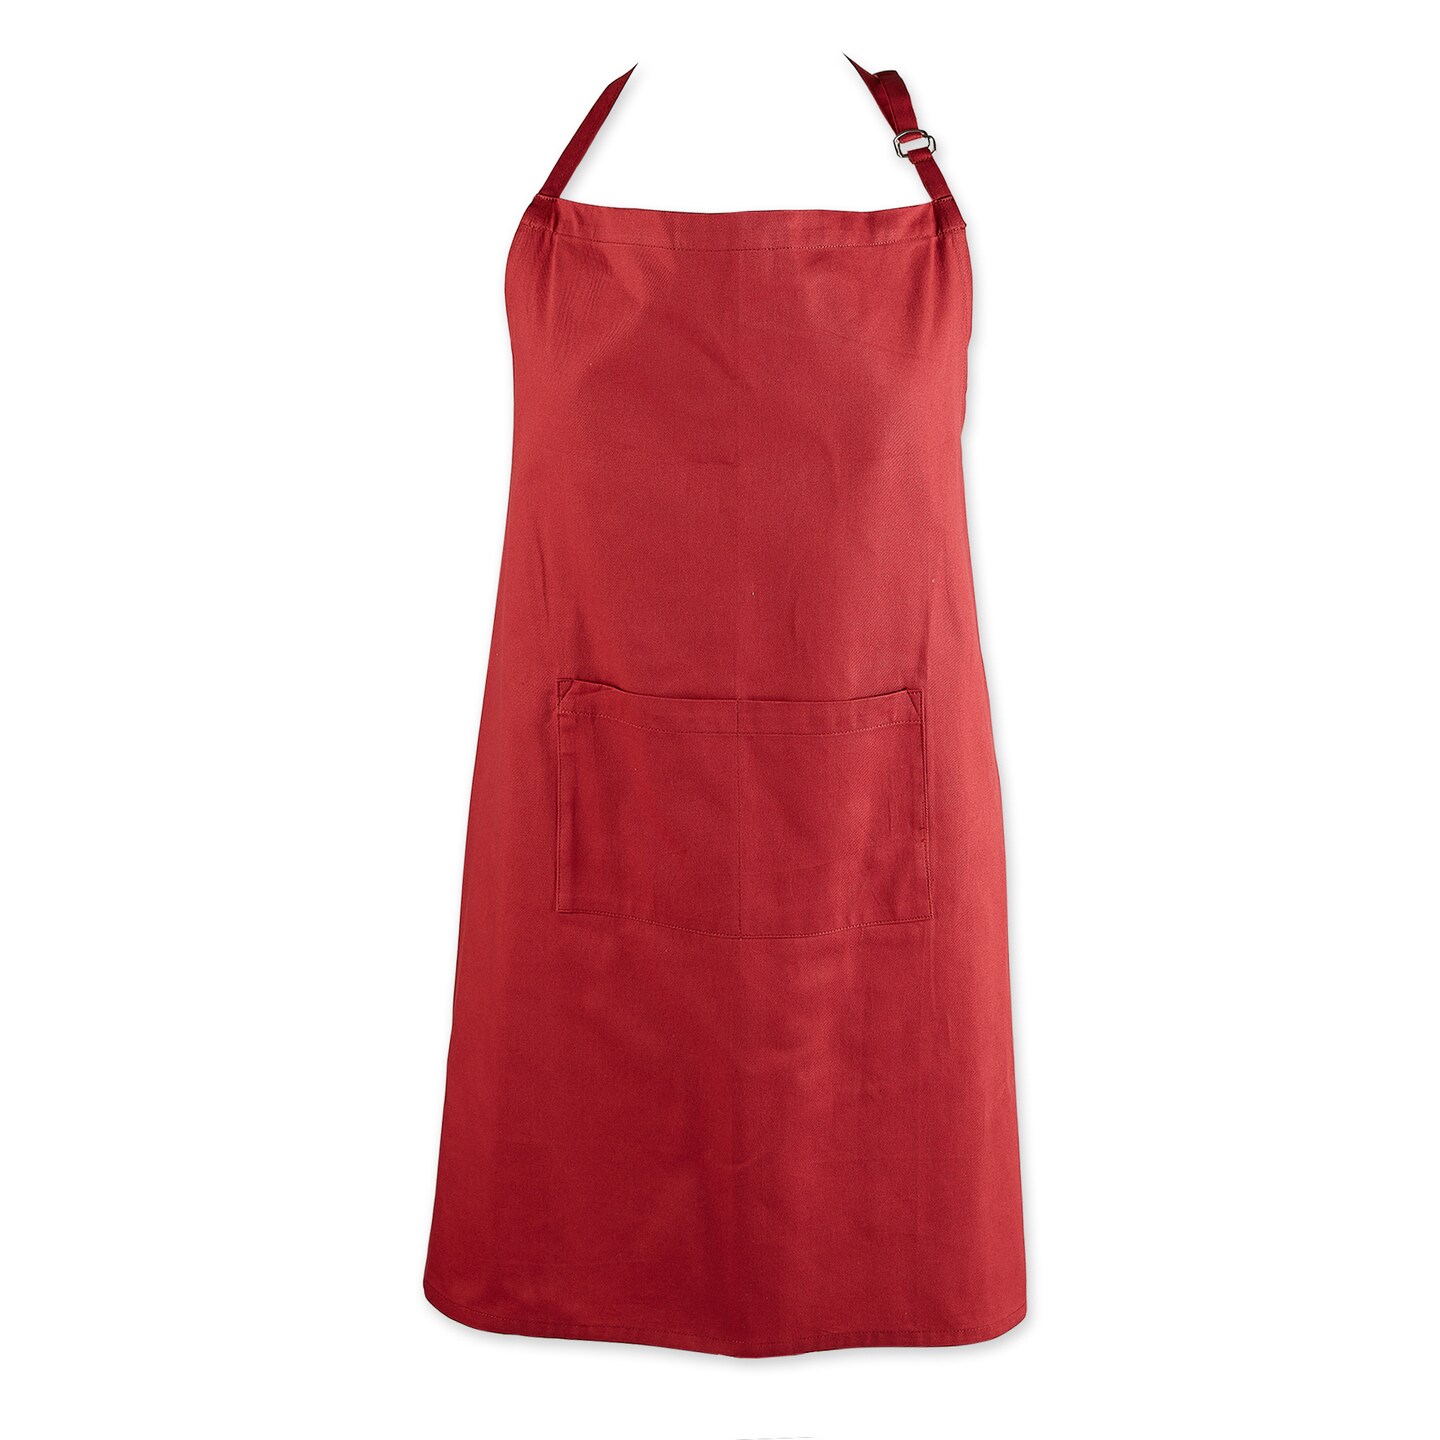 Contemporary Home Living 38-Inch Apple Red Chef Apron With a Tie Closure - Size XL